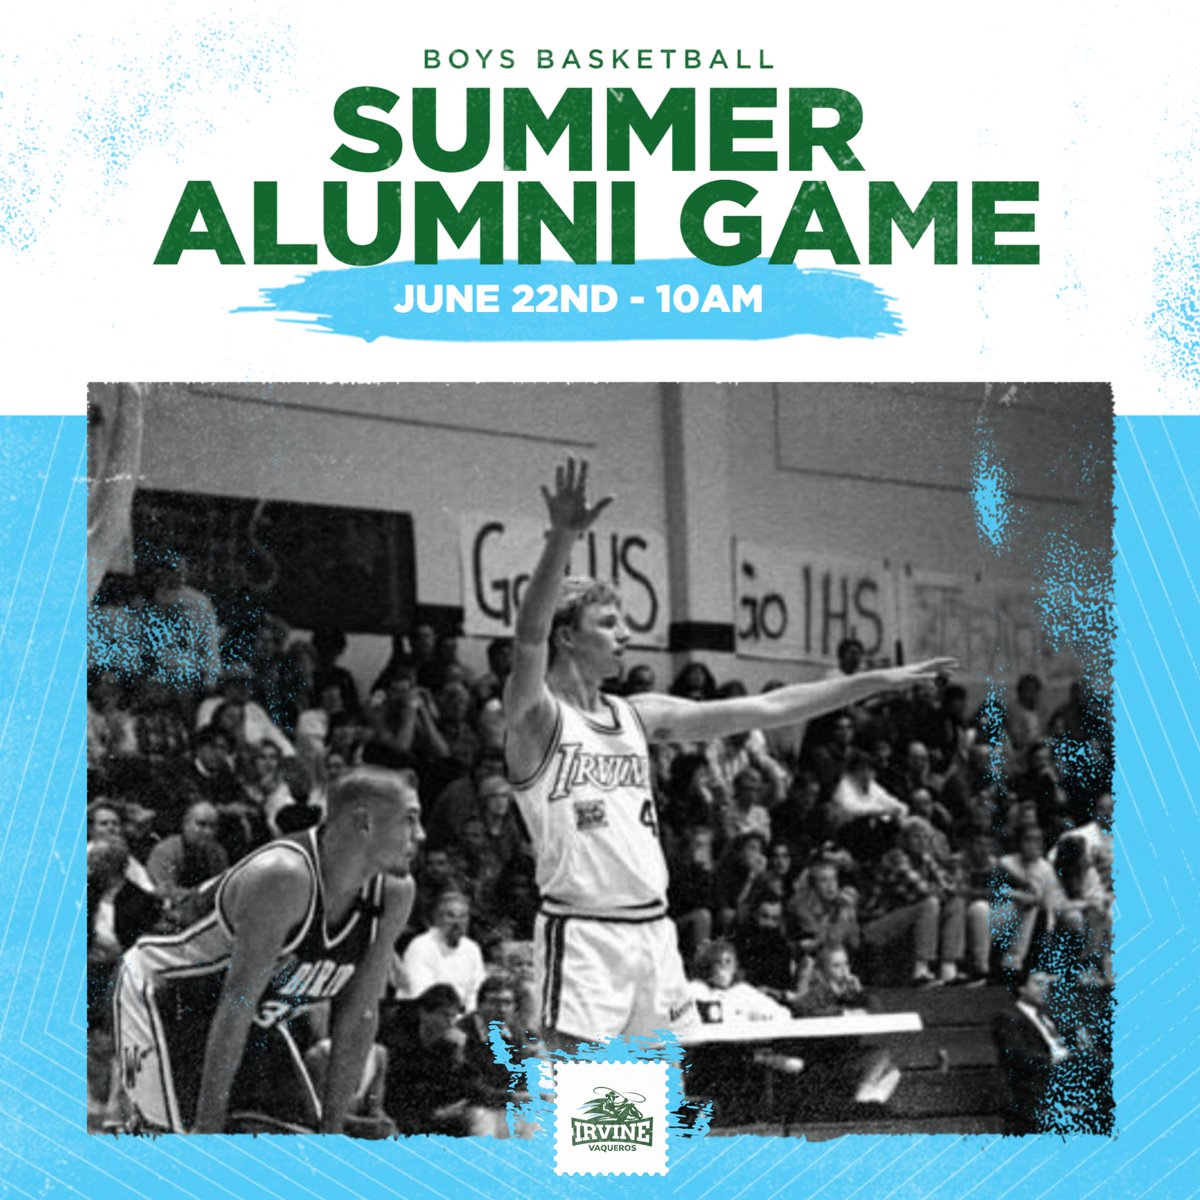 Calling all Irvine Boys Basketball Alumni! Did you play varsity basketball for Irvine? Come on out June 22nd for our alumni game at 10am against our current varsity team. Lunch will be provided for all alumni and varsity from 11-12:30pm. #GoVaqueros